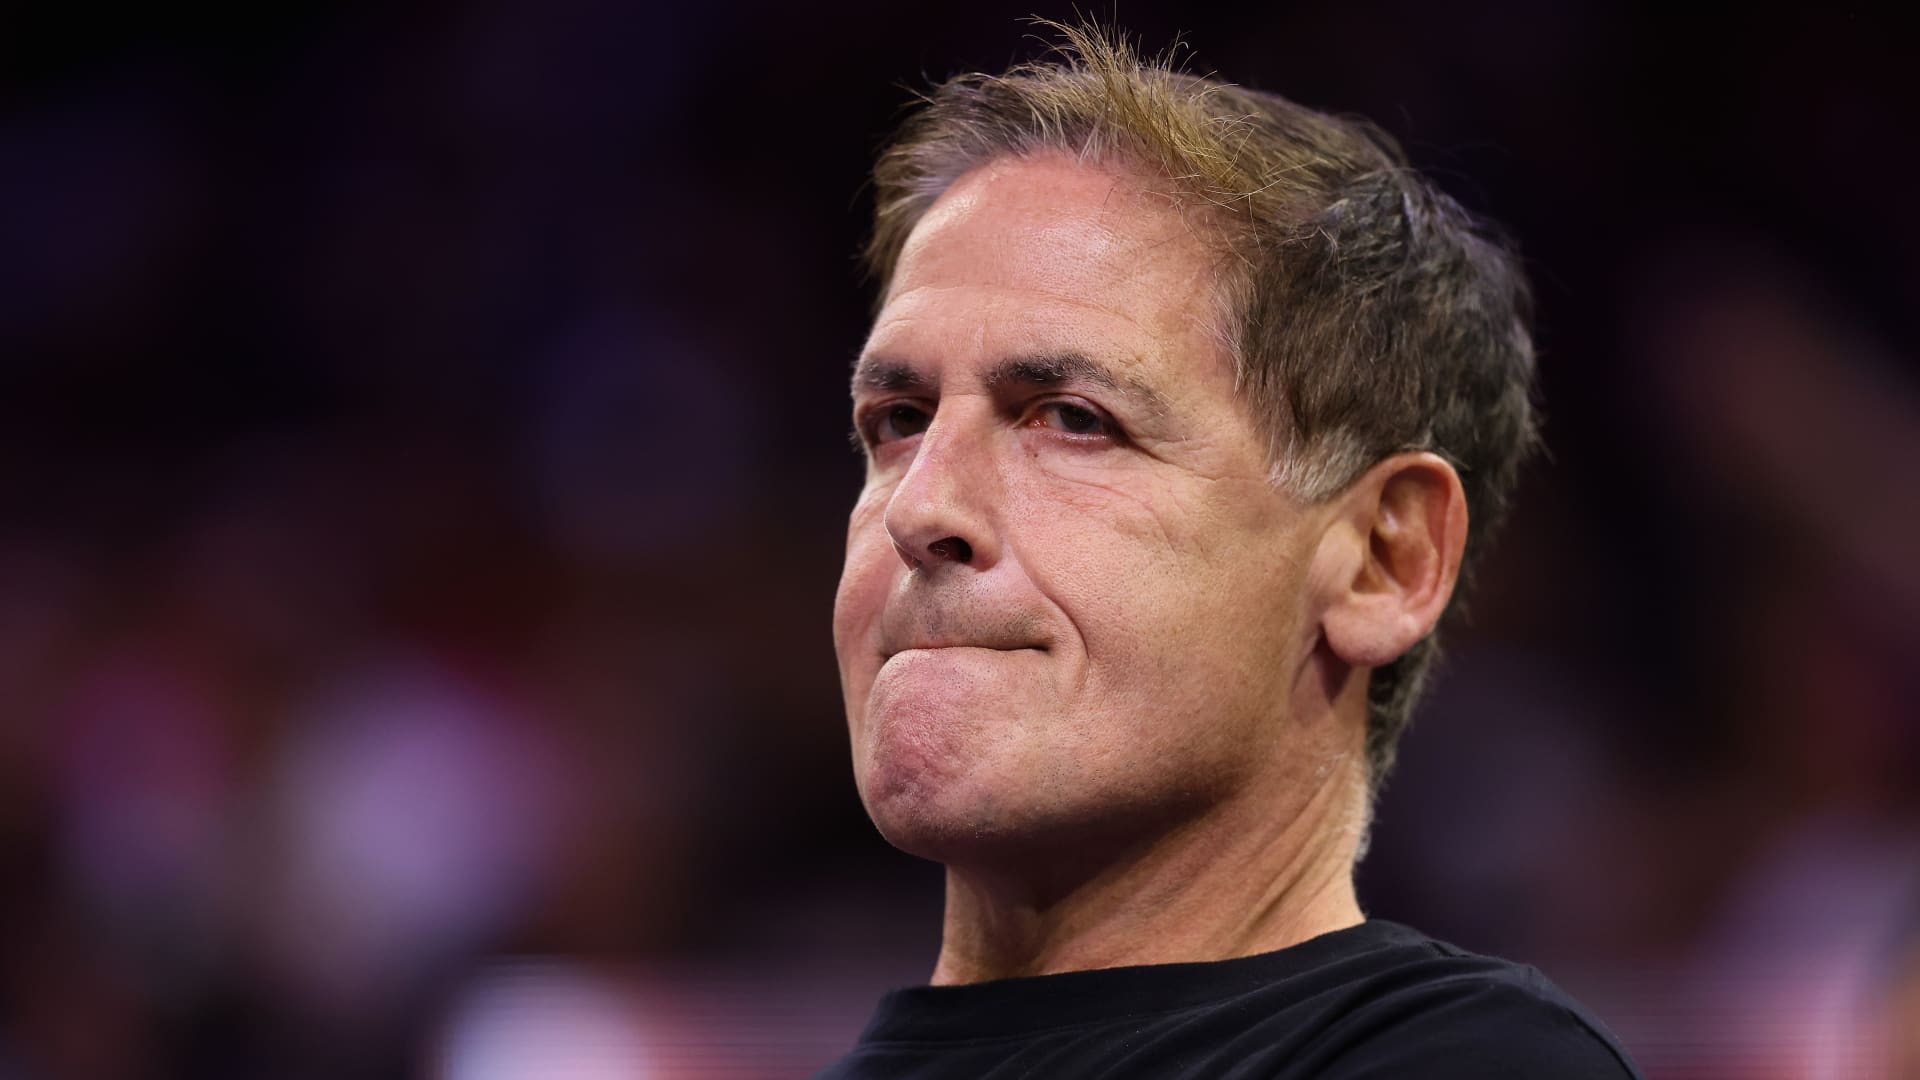 Mark Cuban has 4 rules for making money—No. 4 is: ‘Know your s–t better than anyone else in the room’